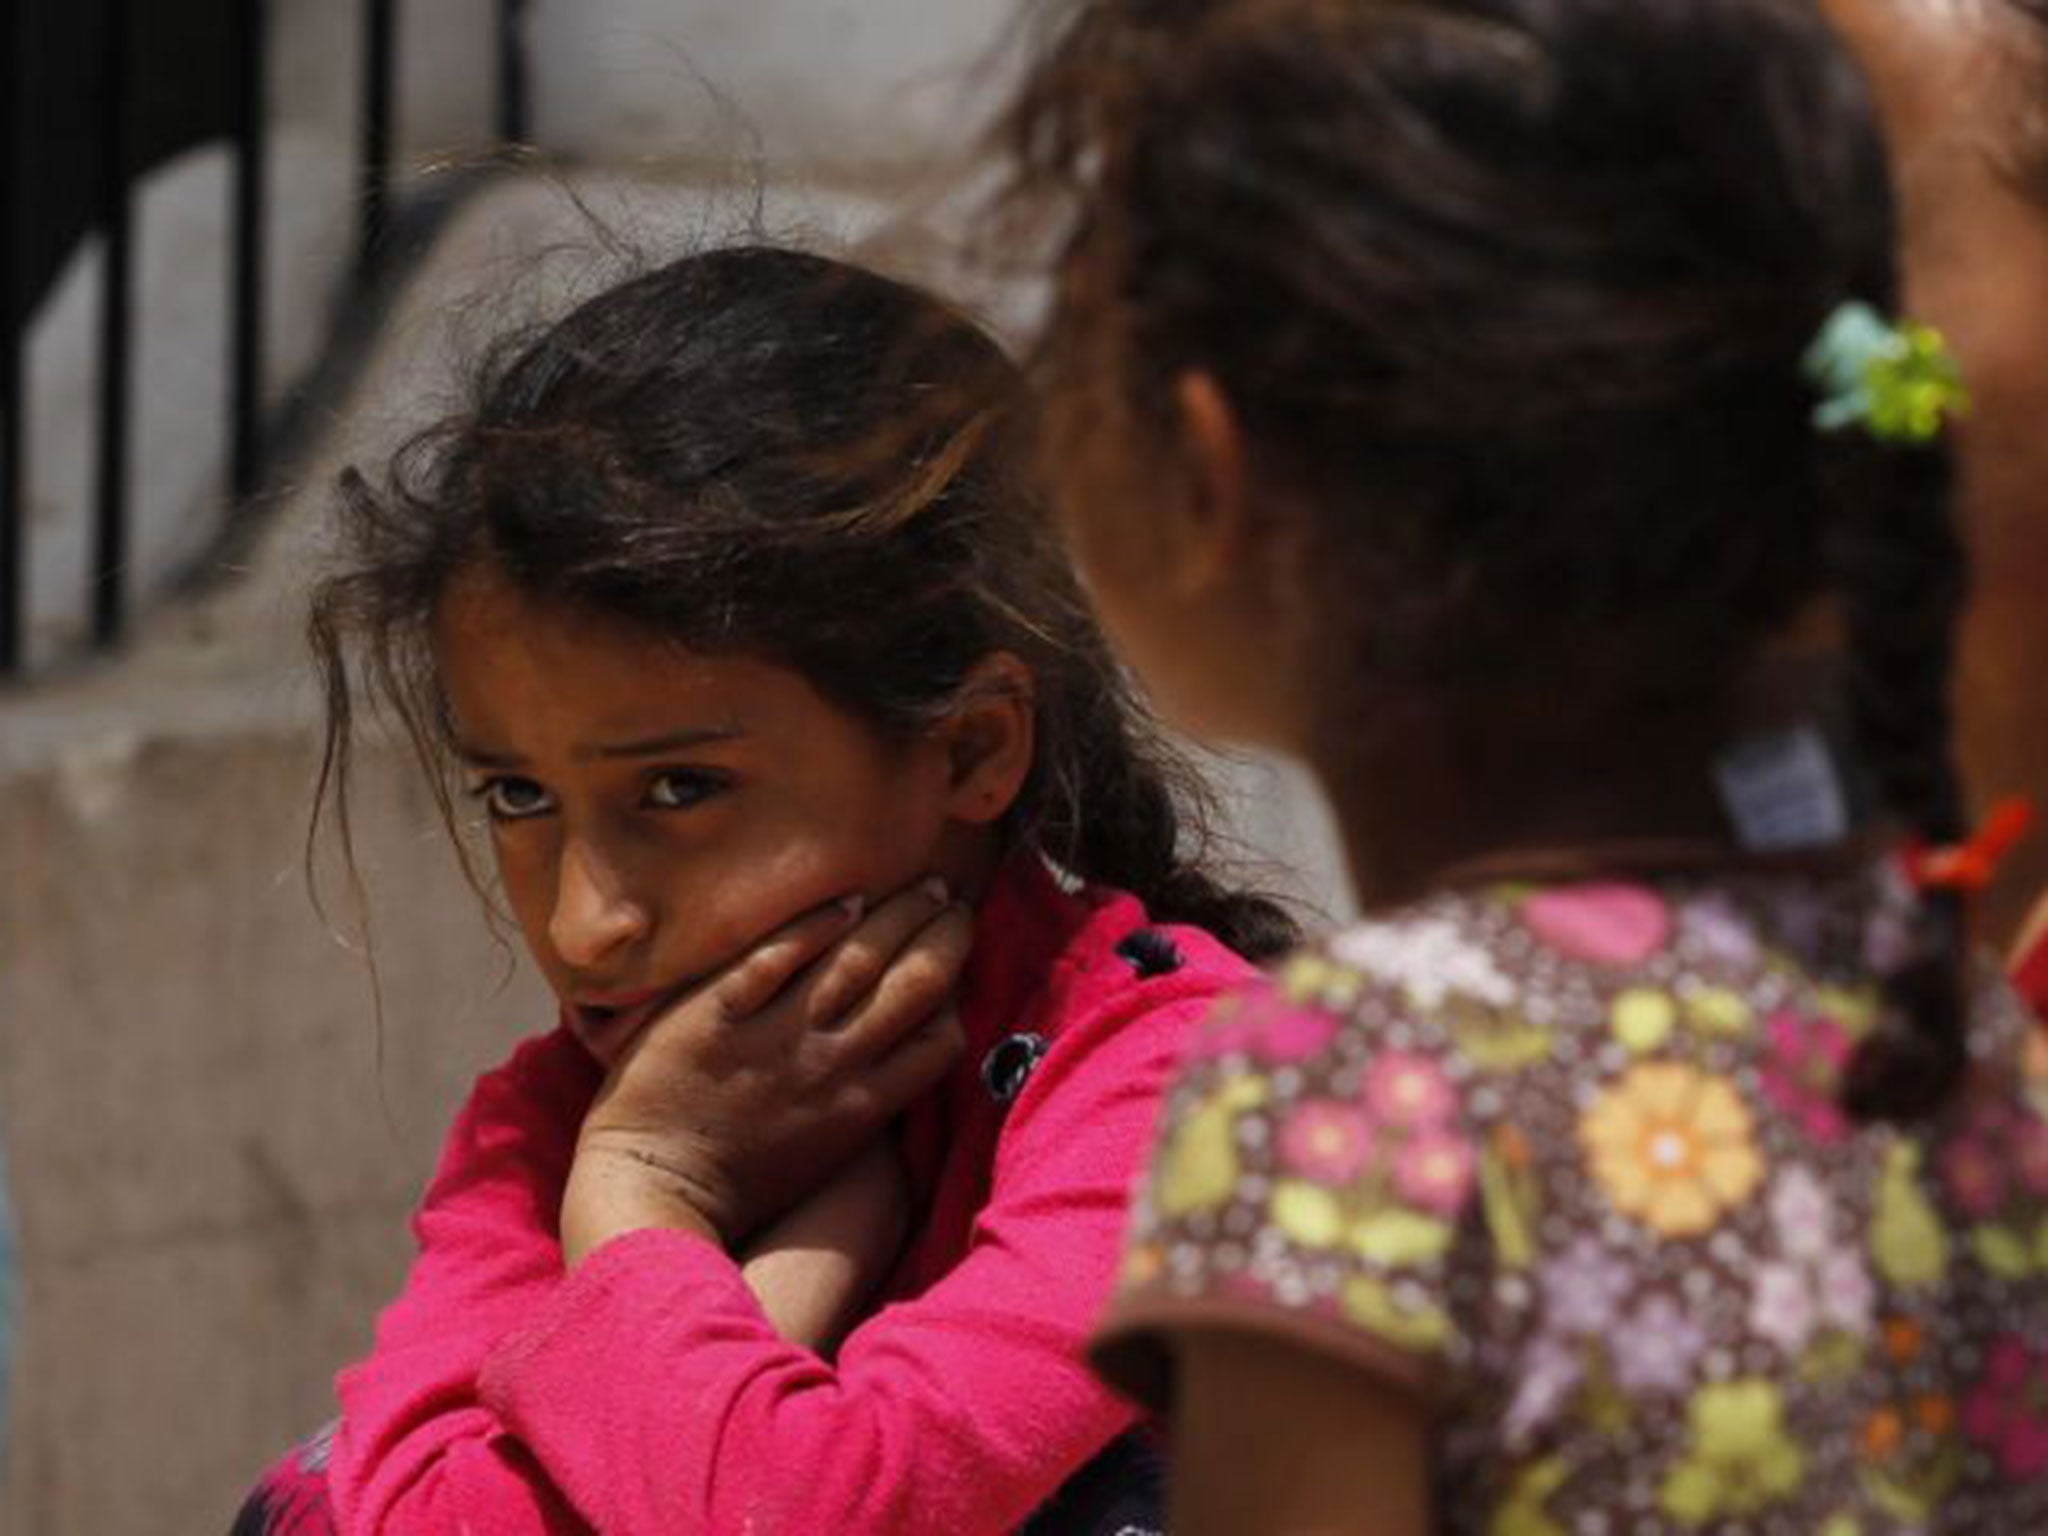 Displaced Yemeni children gather at a shelter inside a school turned temporary evacuation center in Sana'a, Yemen, 26 July 2015